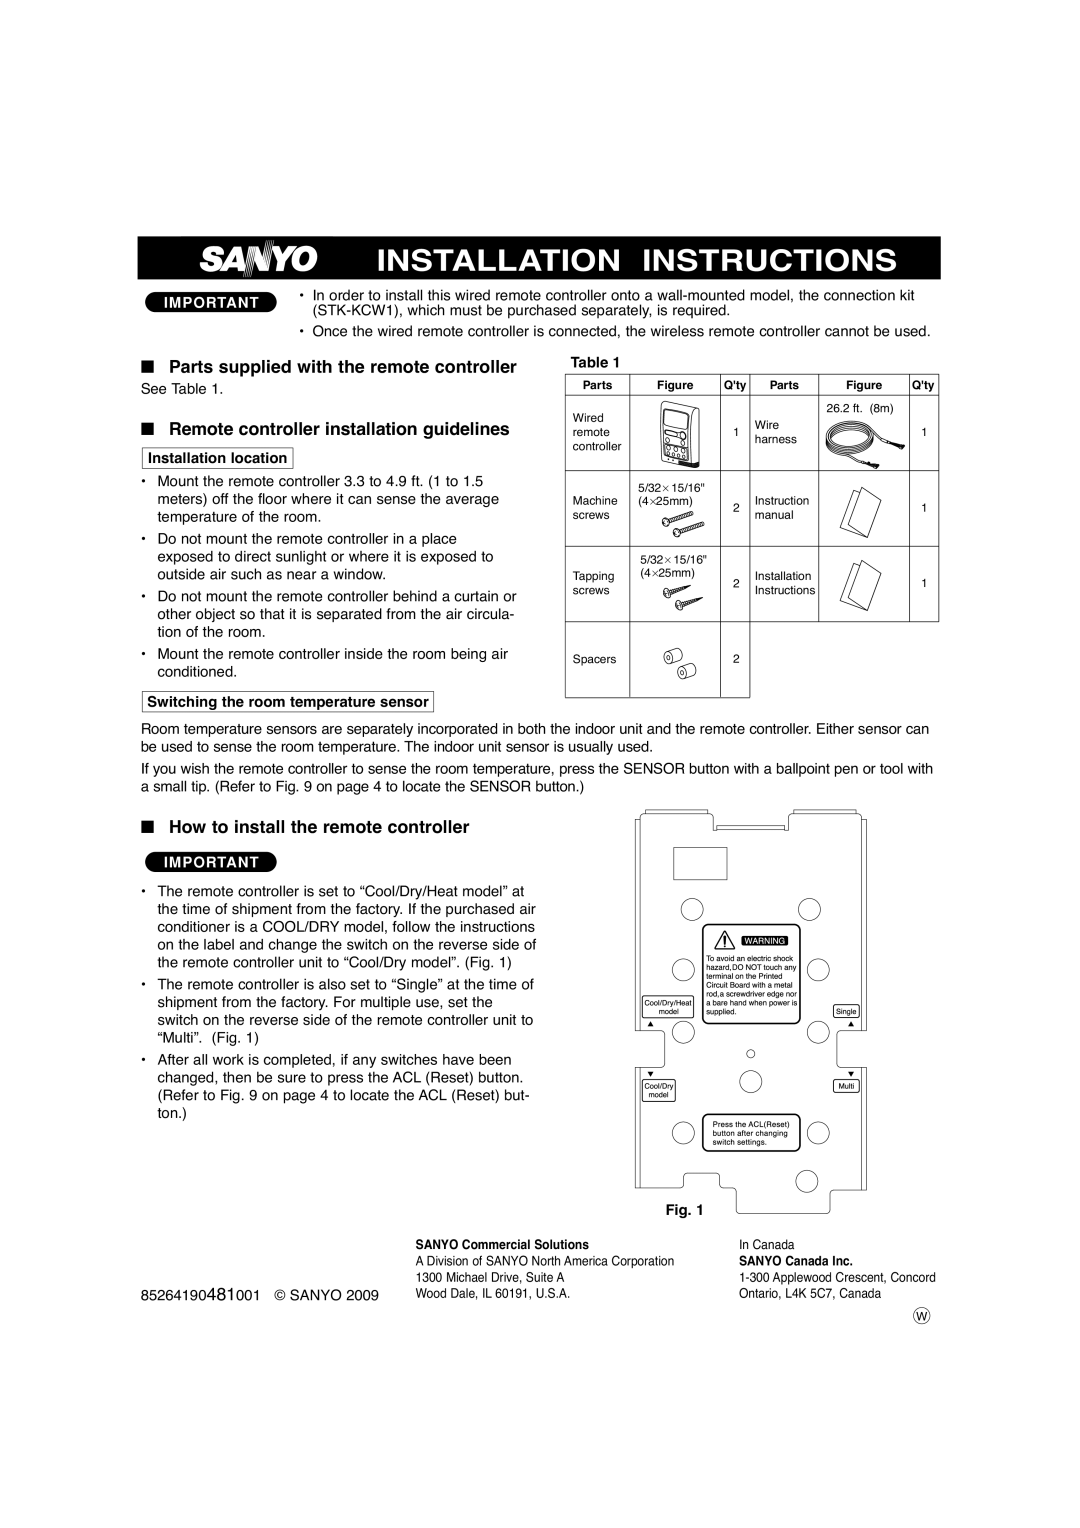 Sanyo XMHS1272 Installation Instructions, Parts supplied with the remote controller, How to install the remote controller 